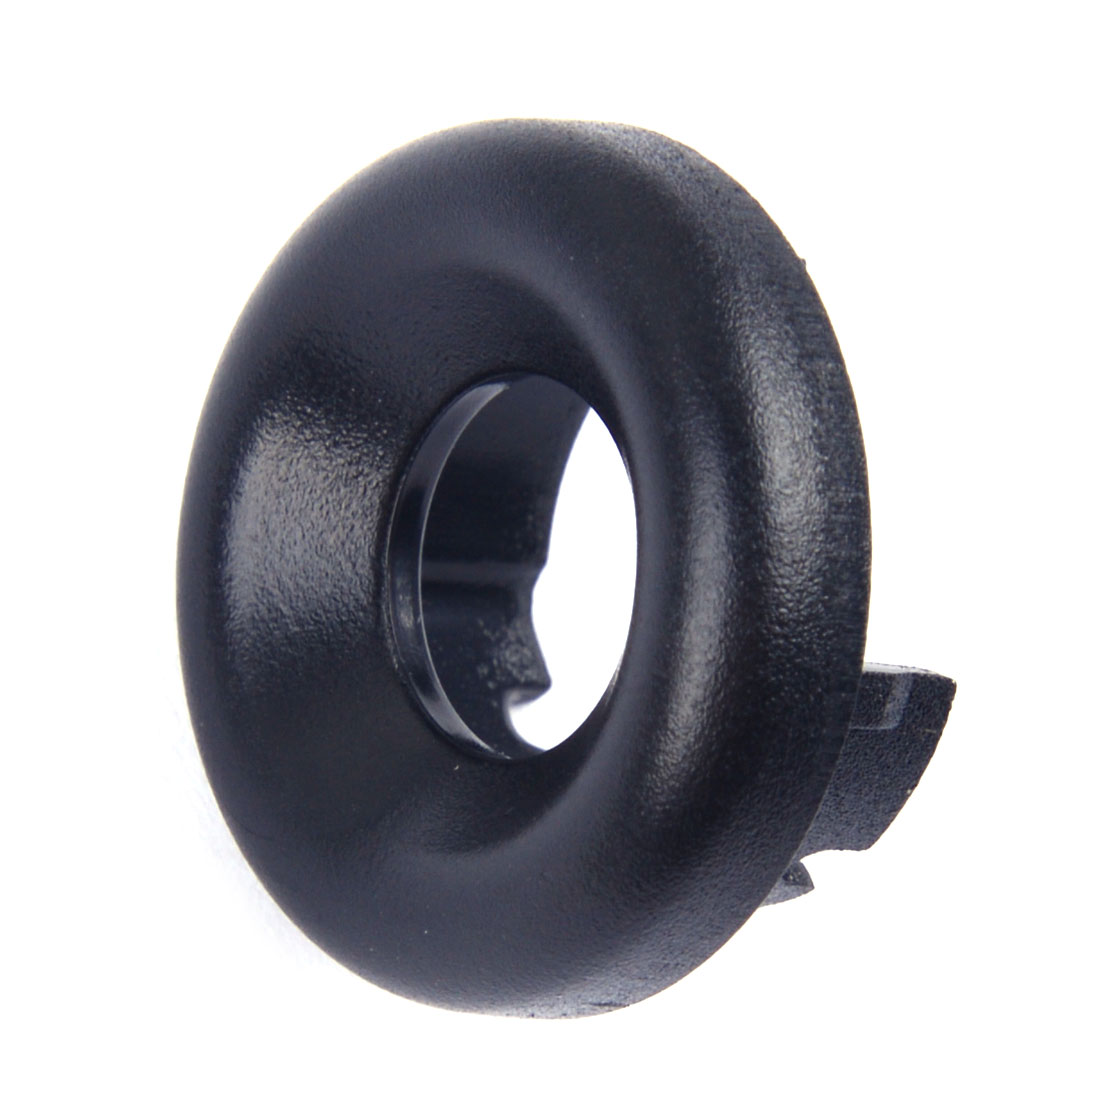 Replaces Steering Column Handle Button End Bezel Cover for Ford Overdrive Gear Shifter Ring Cap 